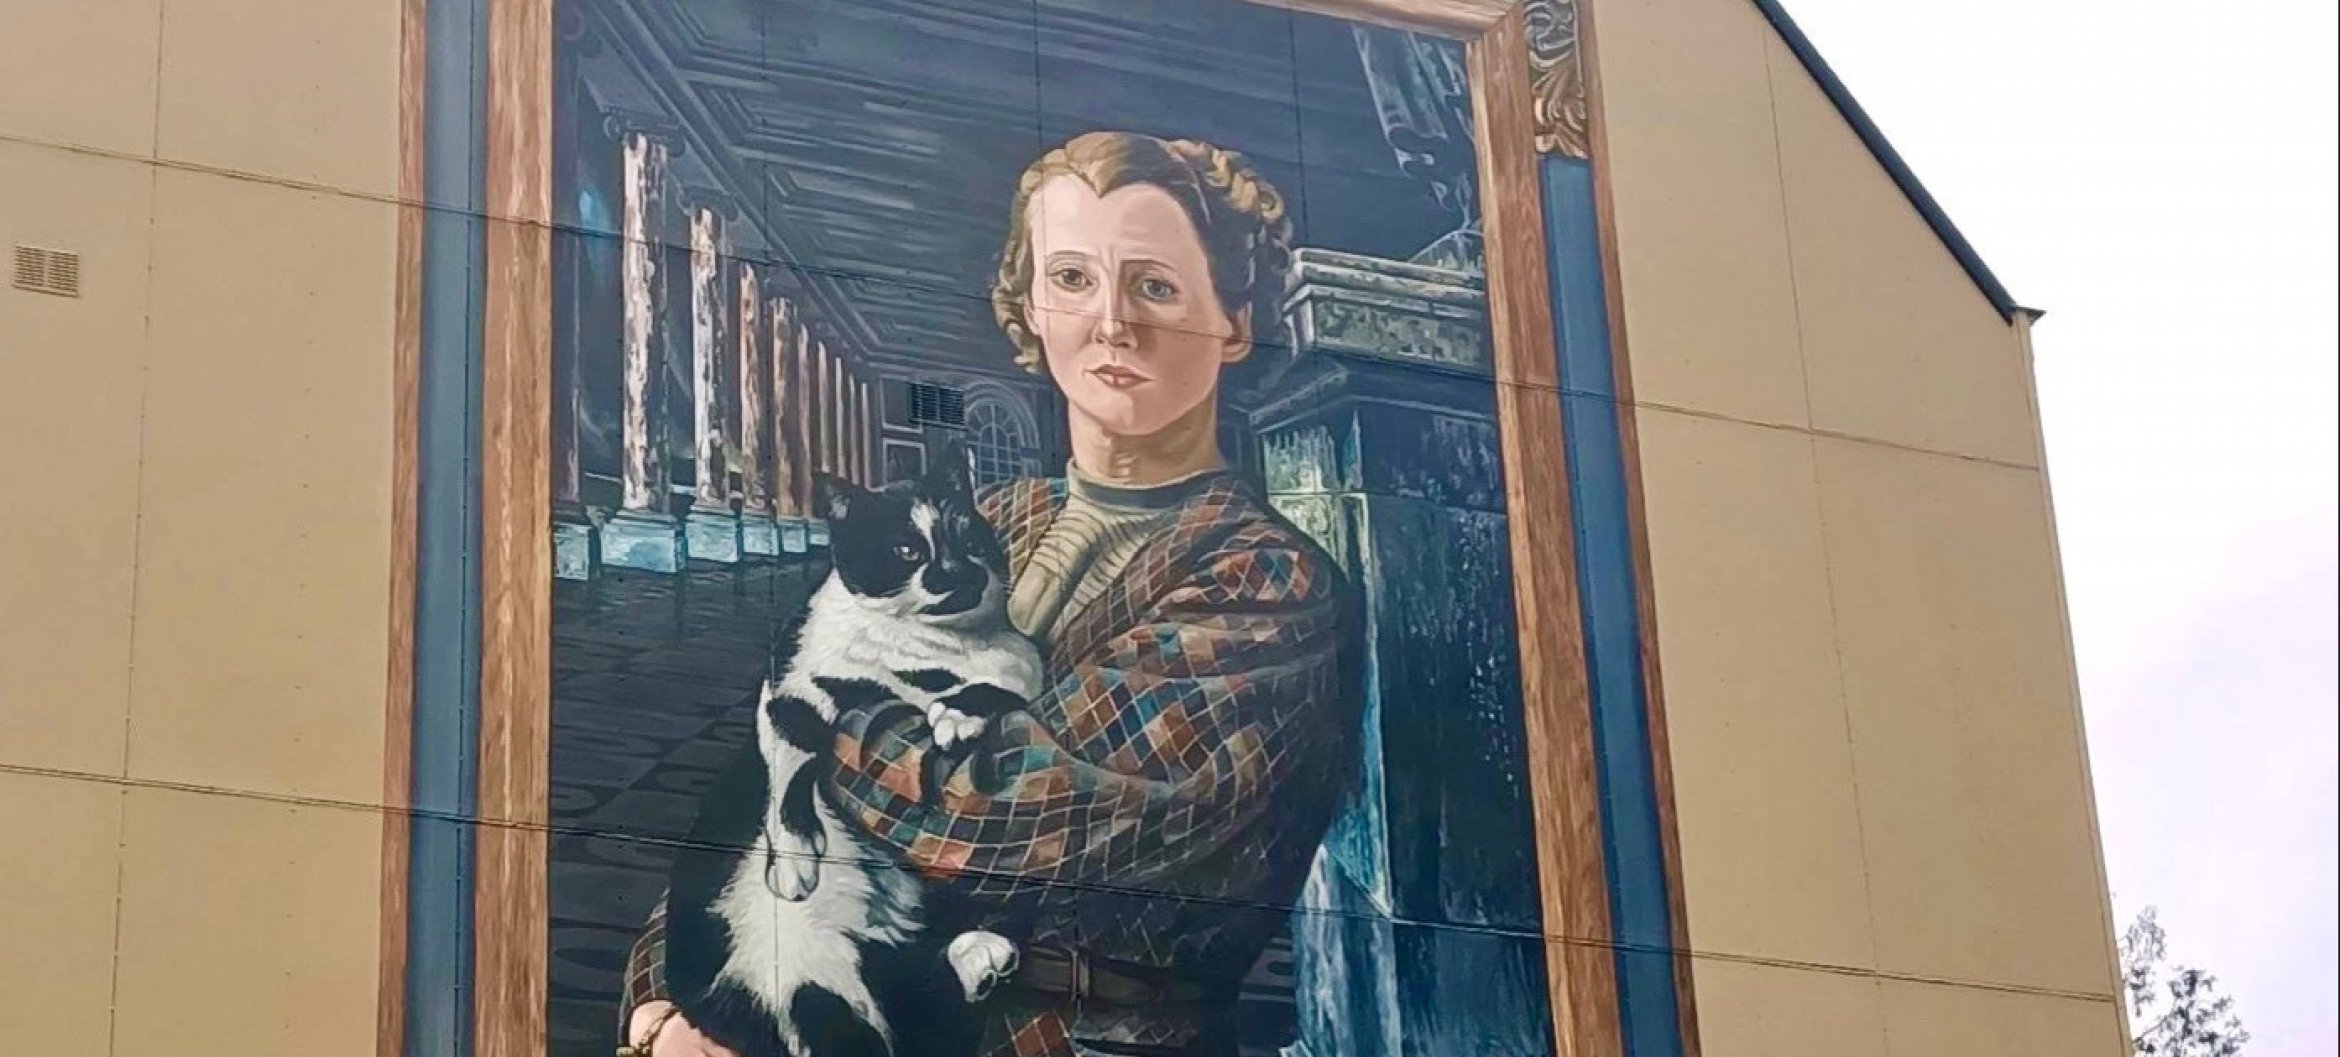 Wilma met kat by Carel Willink, at the Utrechtseweg, gifted by Museum Arnhem: an example of art in the public sphere in Arnhem close to ArtEZ | Photo: Melisa Evci.